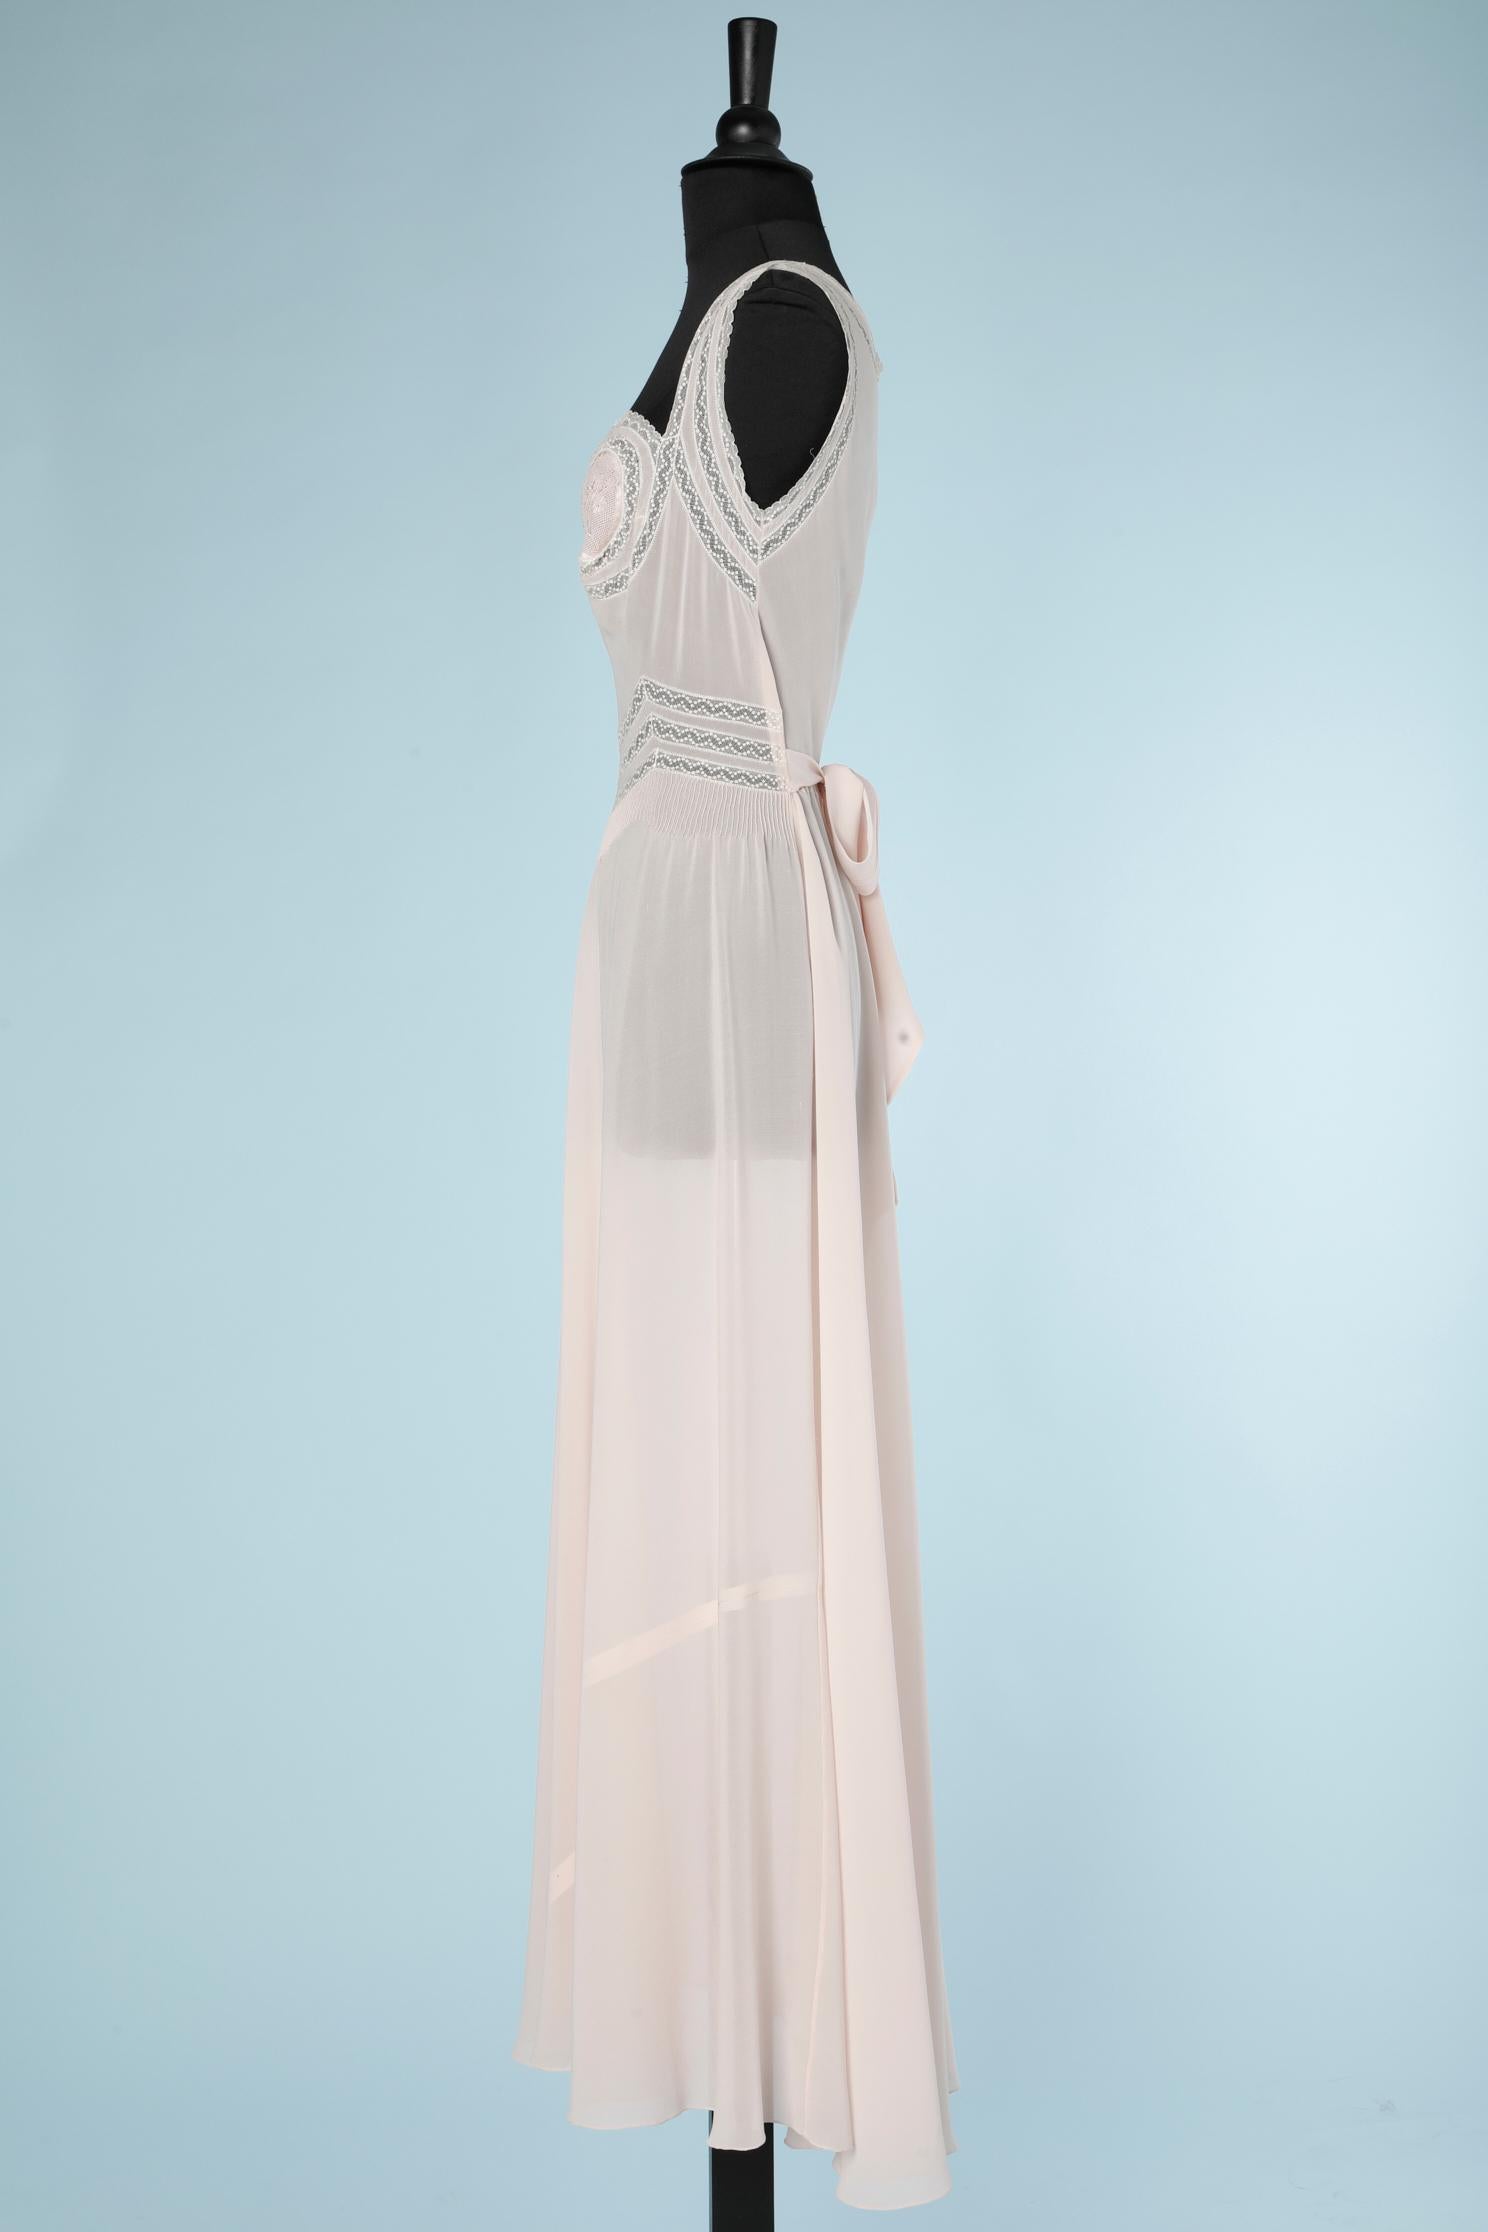 Women's 1930 nightgown in pale pink silk crepe, lace and topstitching 